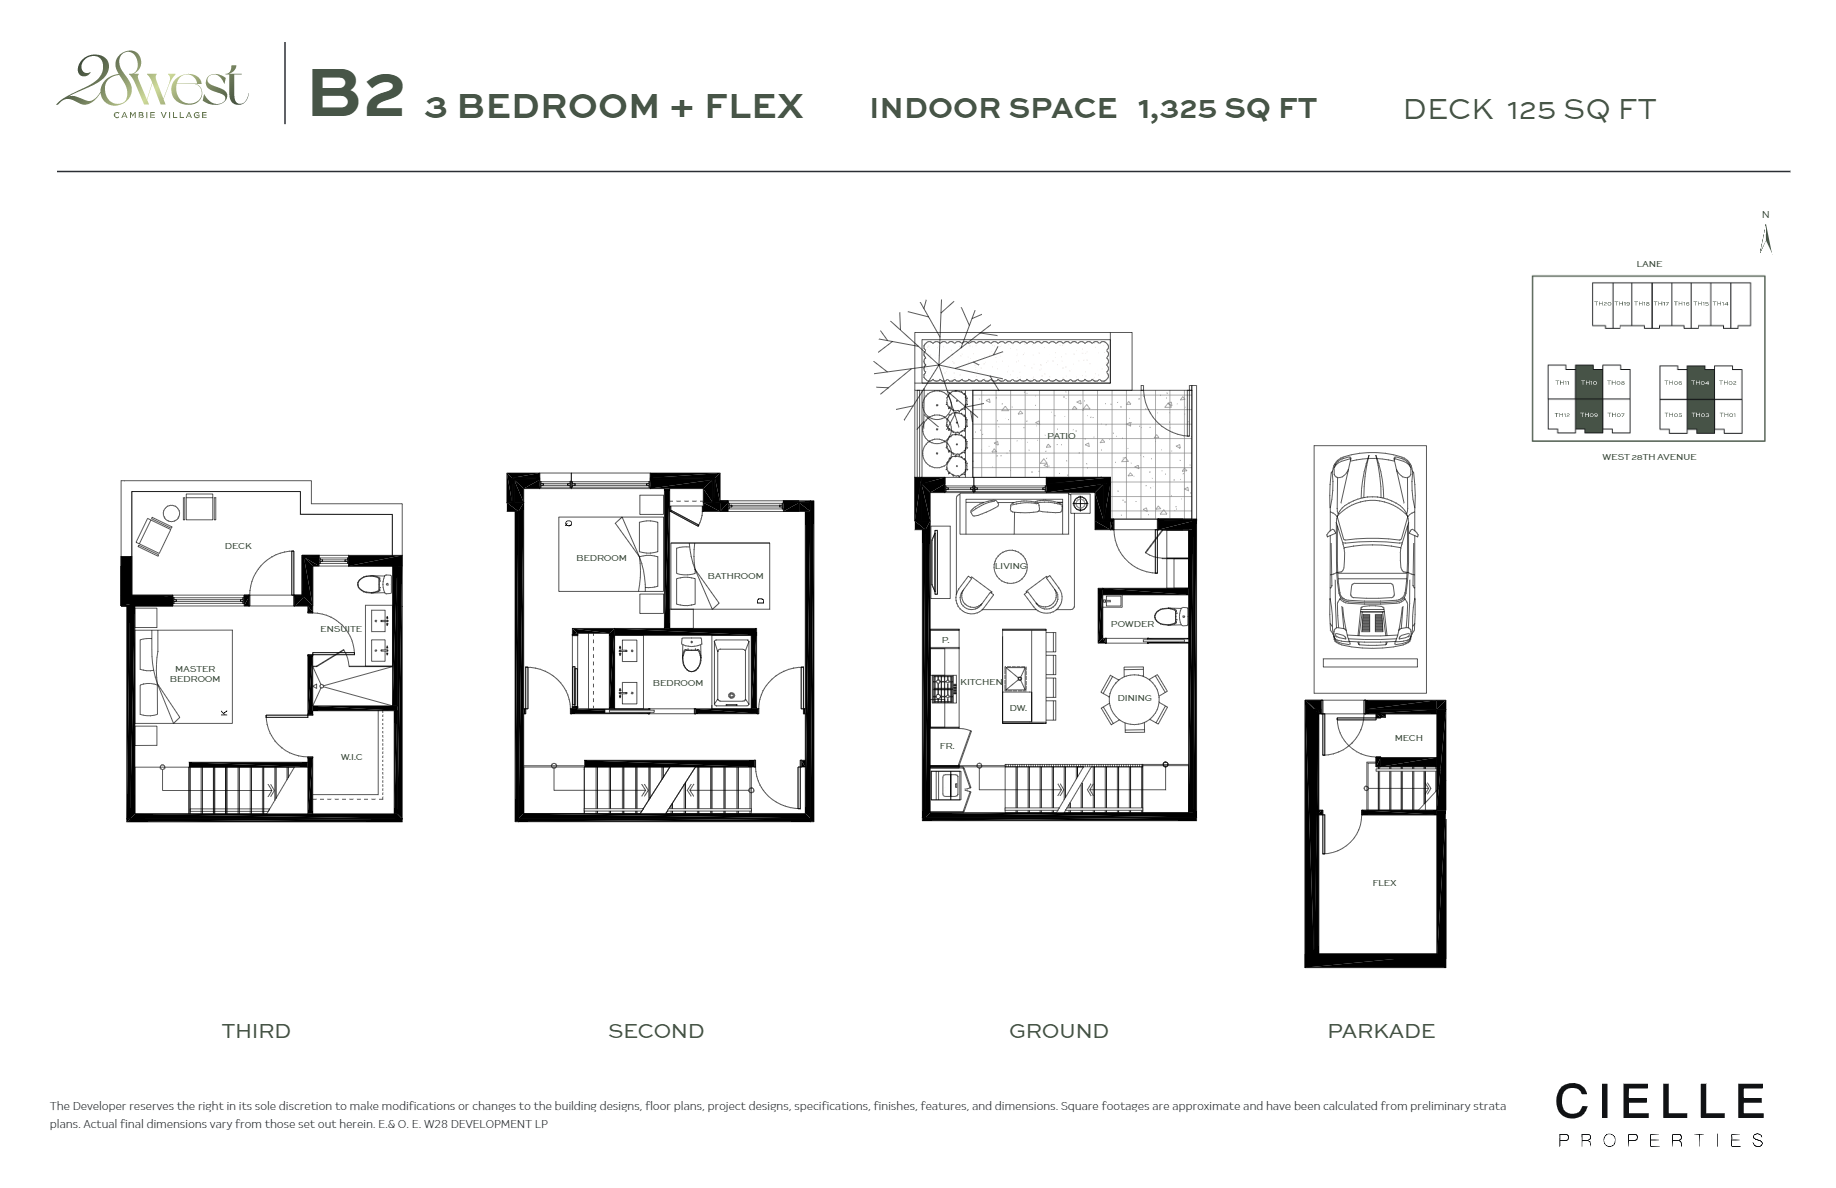 Suite B2 Floor Plan of 28West Towns with undefined beds